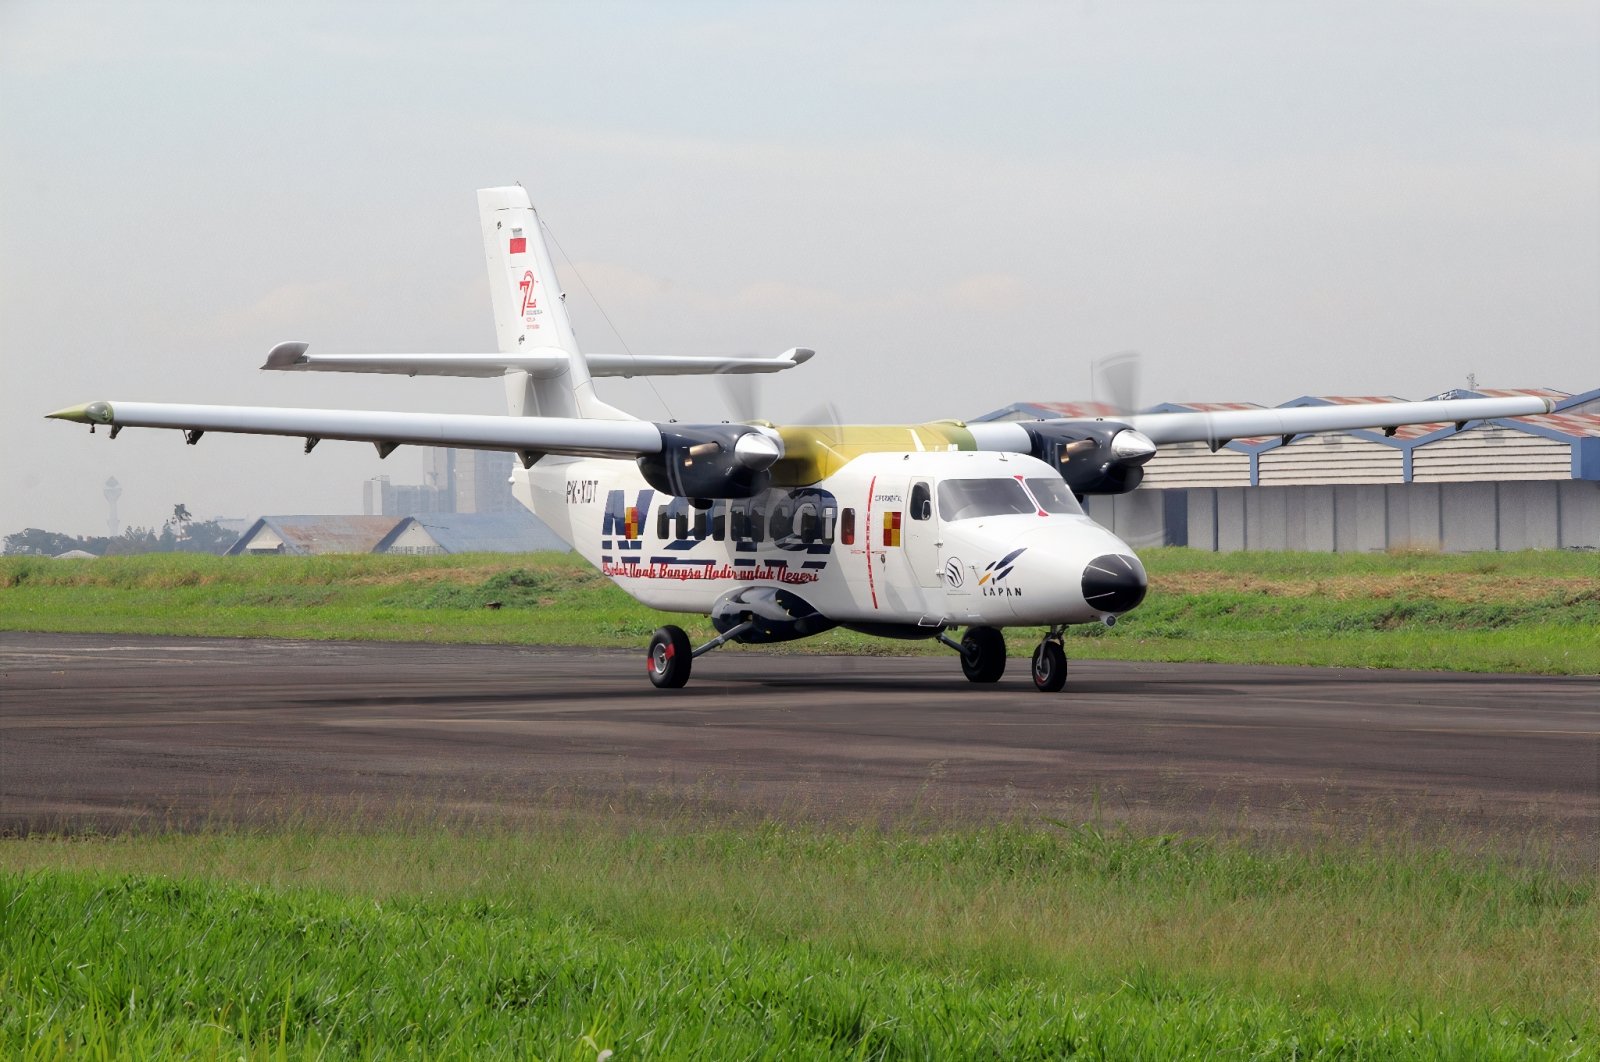 An Indonesian Air Force N219 aircraft lands after its test flight, Aug. 16, 2017. (Photo by Wikipedia)